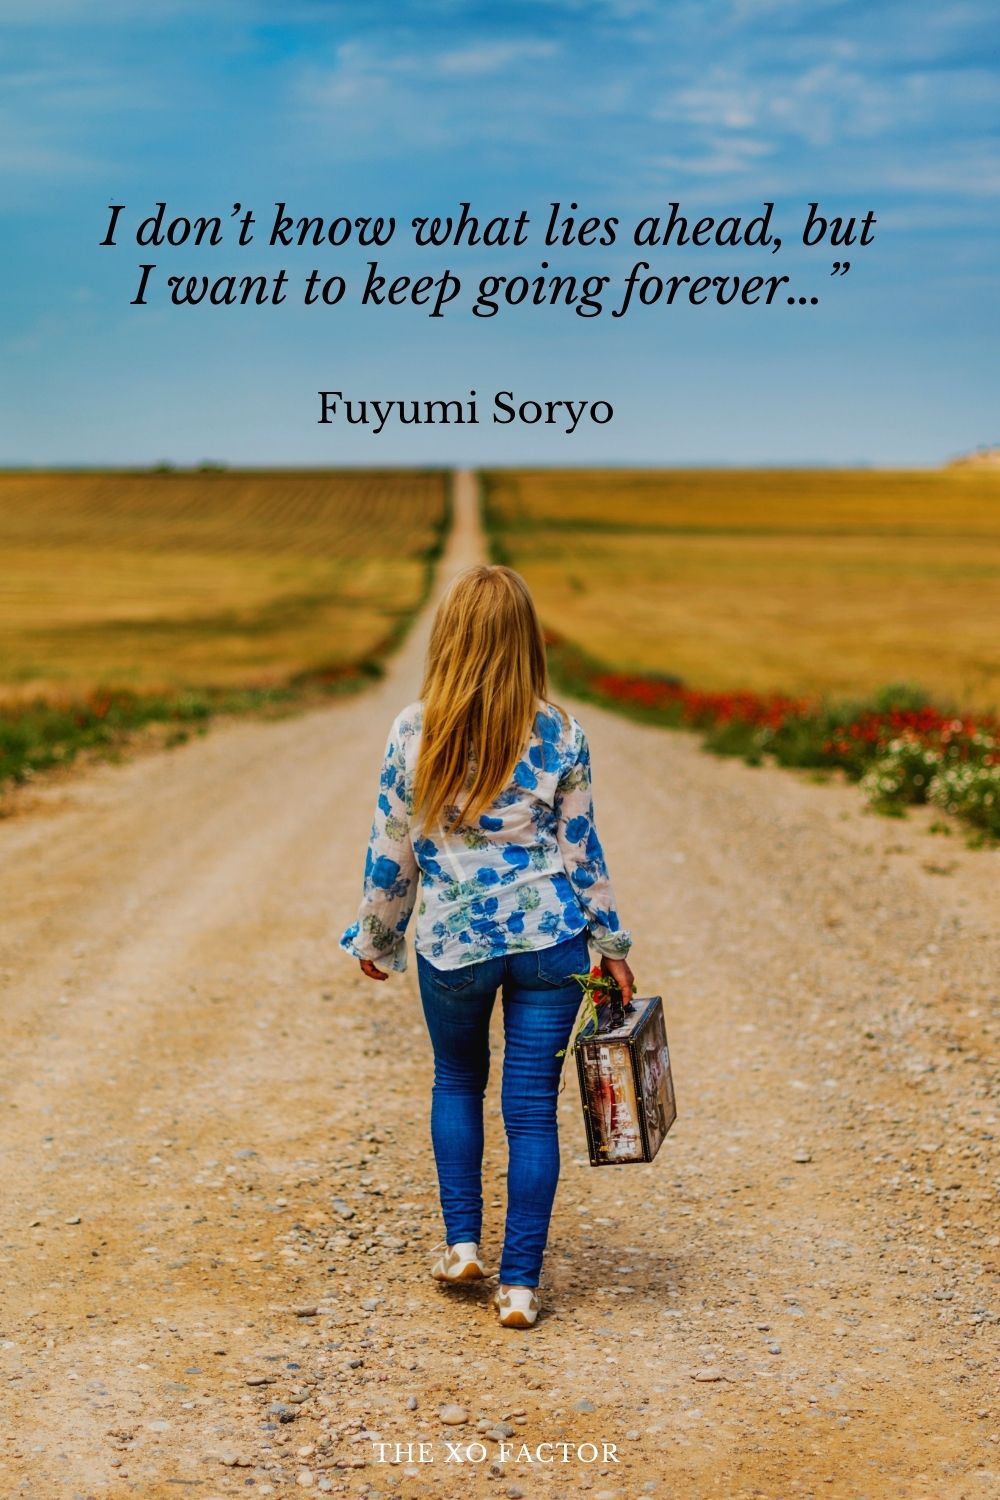 “I don’t know what lies ahead, but I want to keep going forever…” Fuyumi Soryo